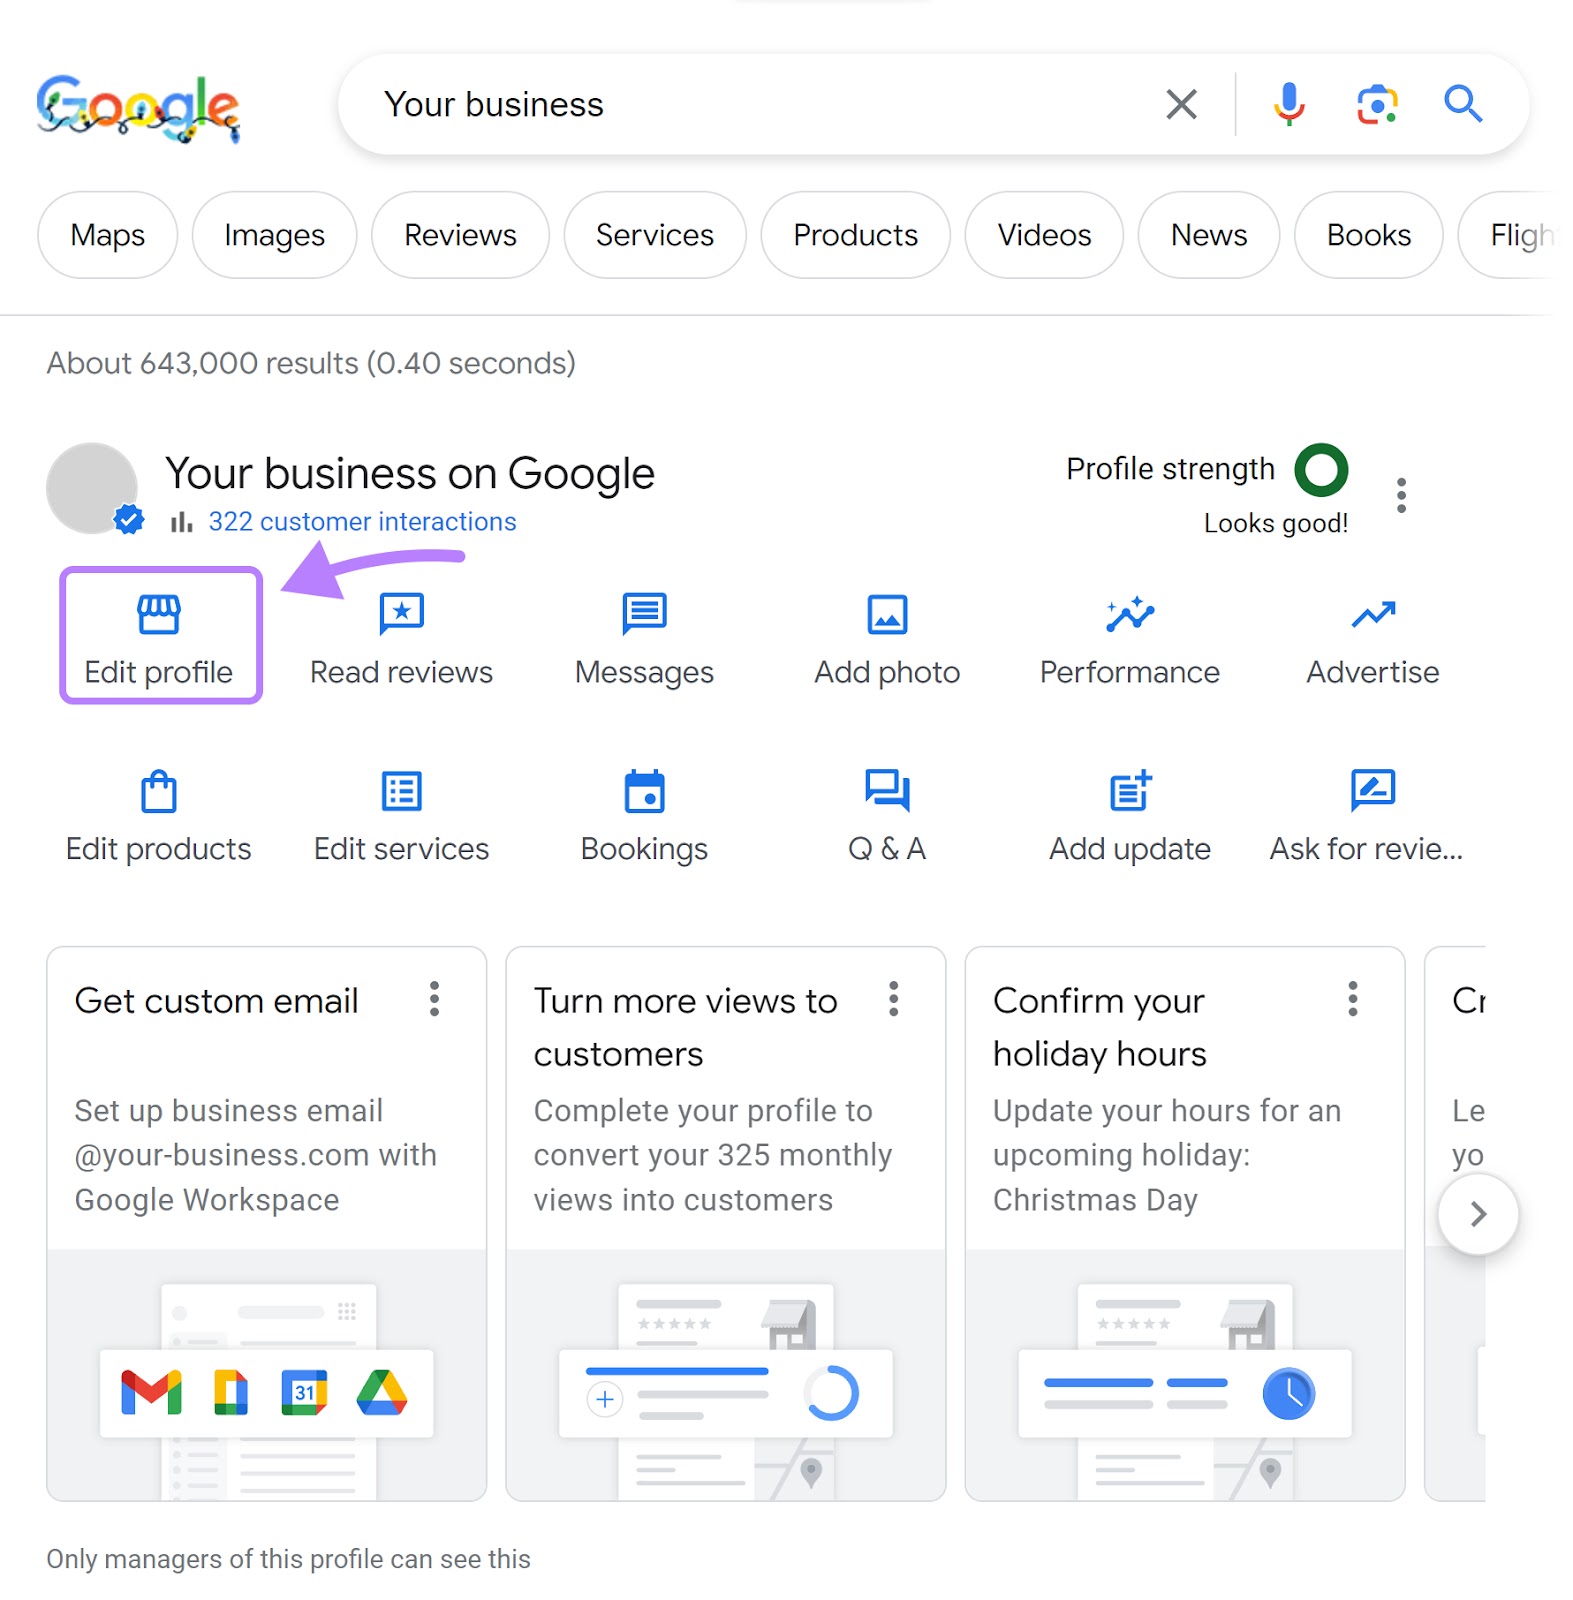 “Edit profile” button selected on Google My Business dashboard